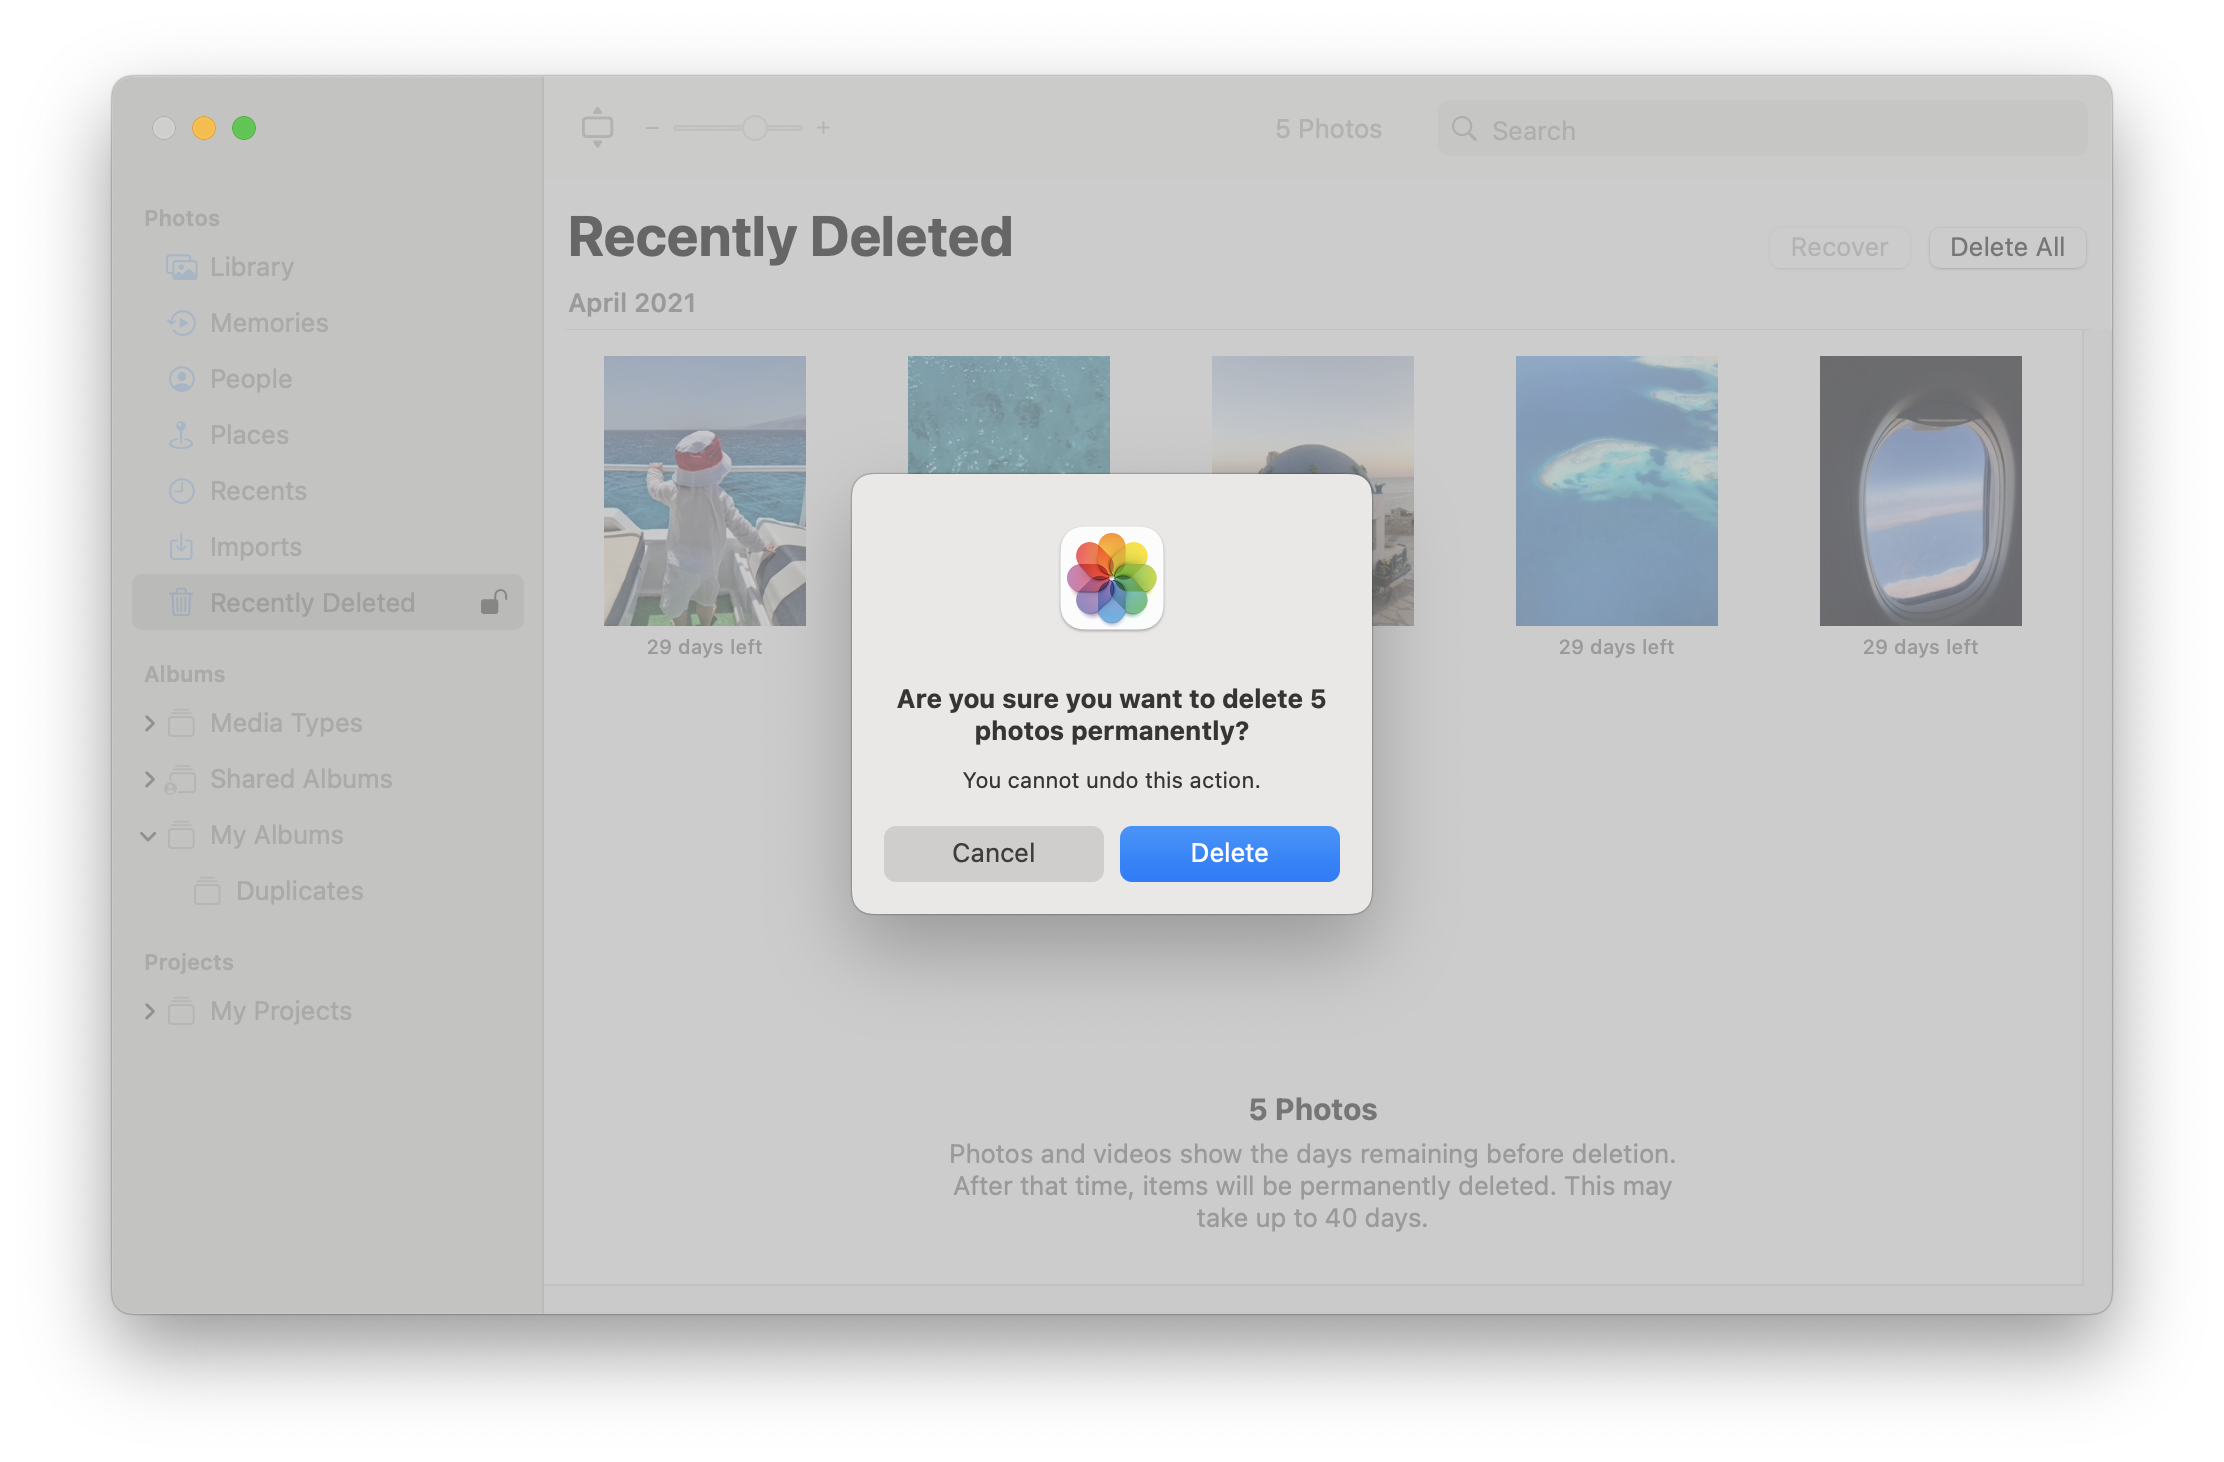 Confirmation message to permanently delete duplicate photos